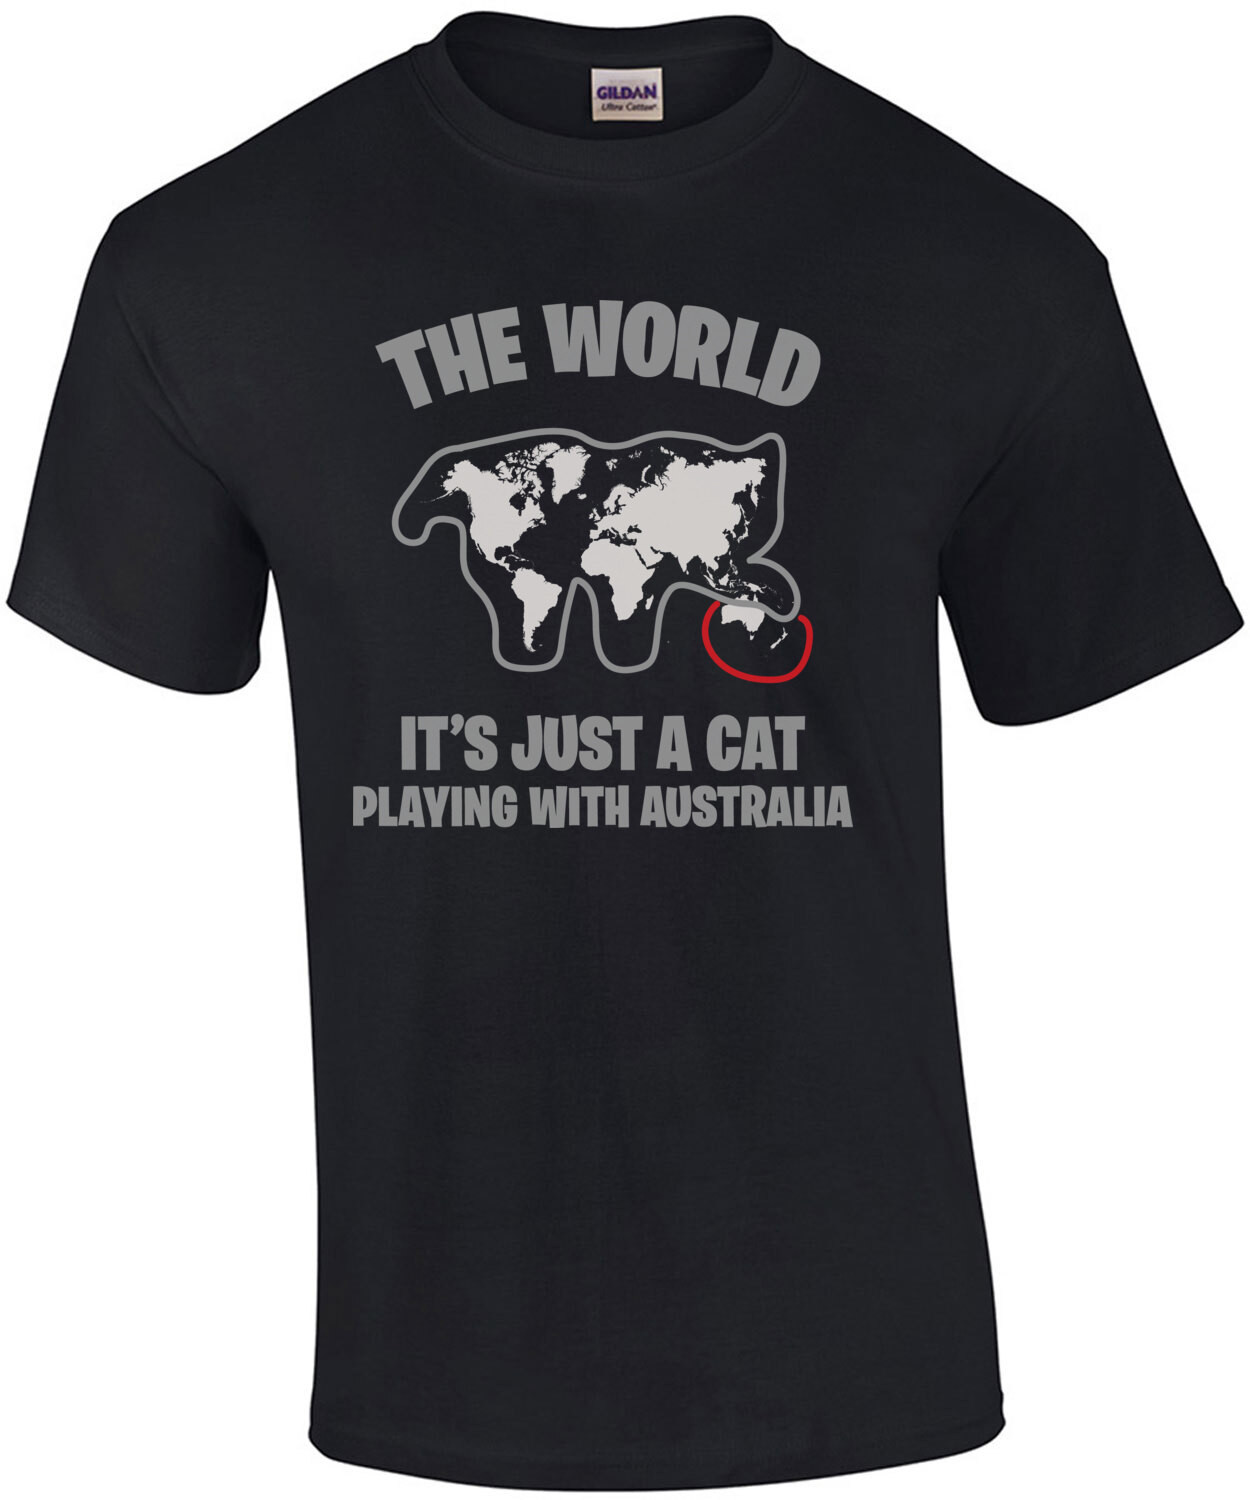 The World - It's just a cat playing with Australia - funny cat t-shirt